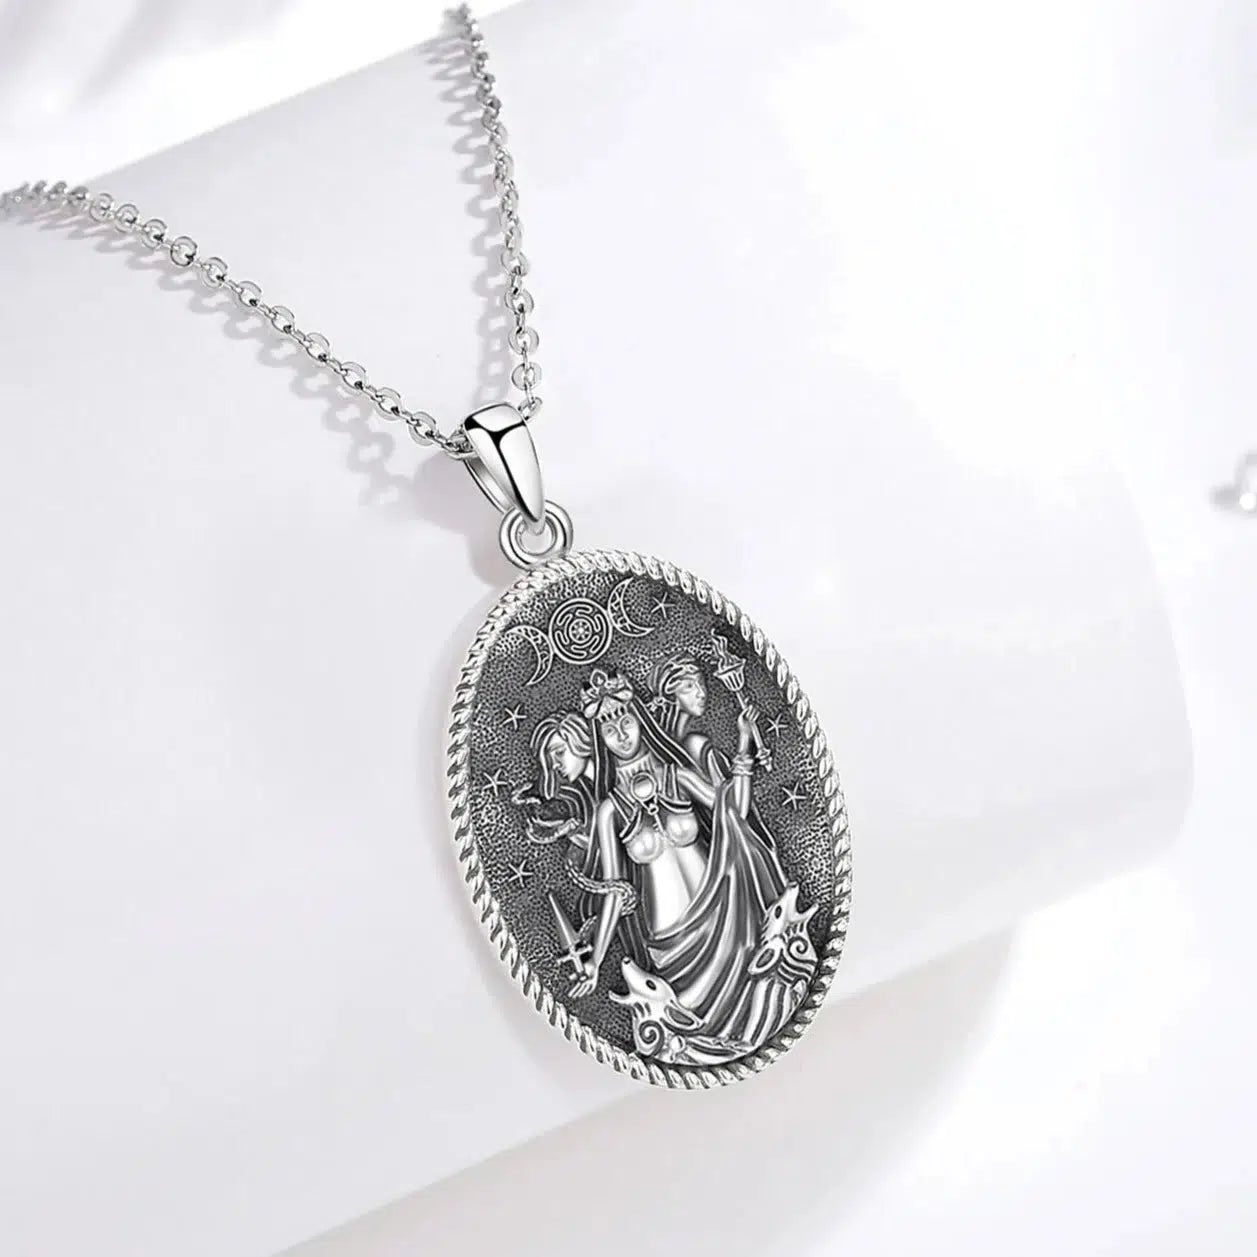 Triple Moon Goddess Necklace Hecate Amulet Pagan Jewelry-MoonChildWorld